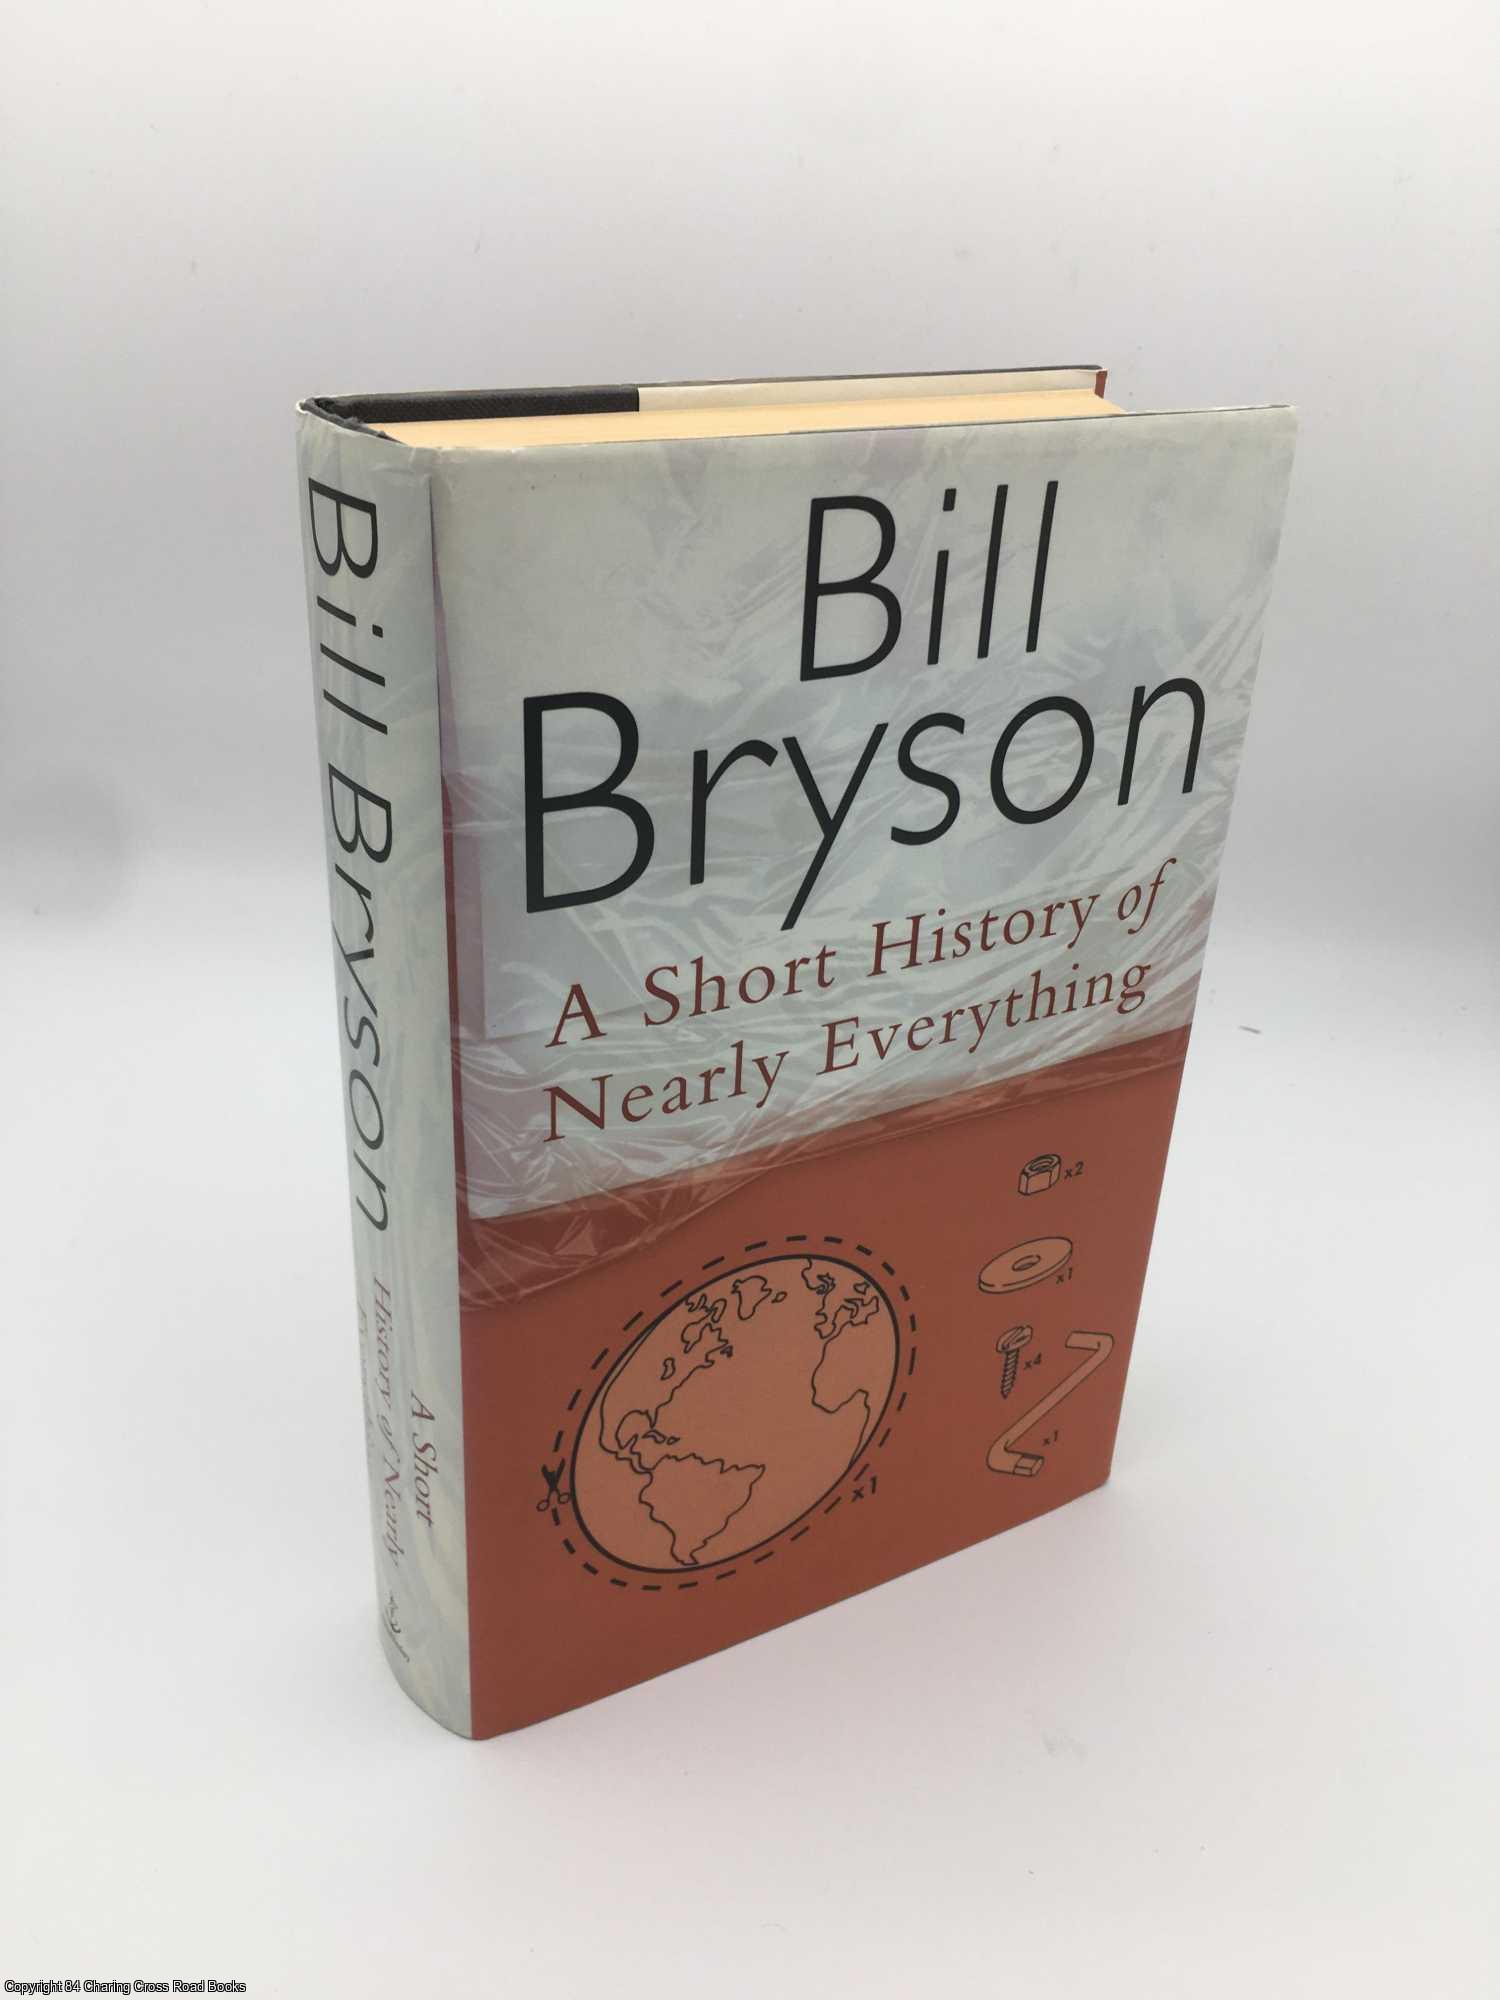 Bryson, Bill - A Short History of Nearly Everything